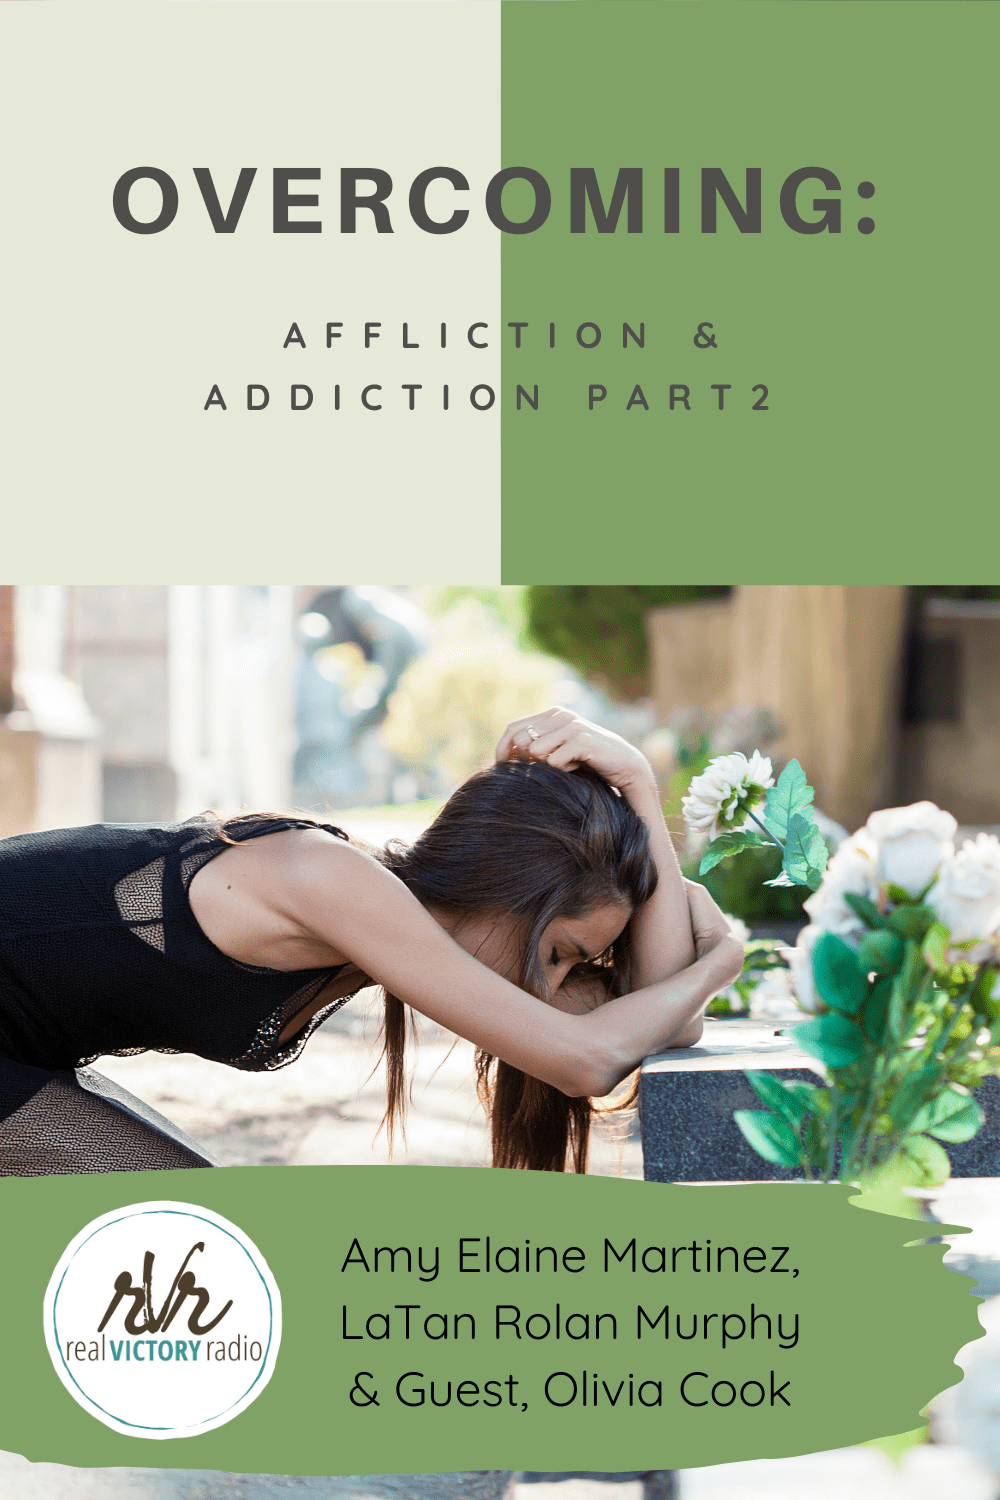 overcoming affliction grief addiction